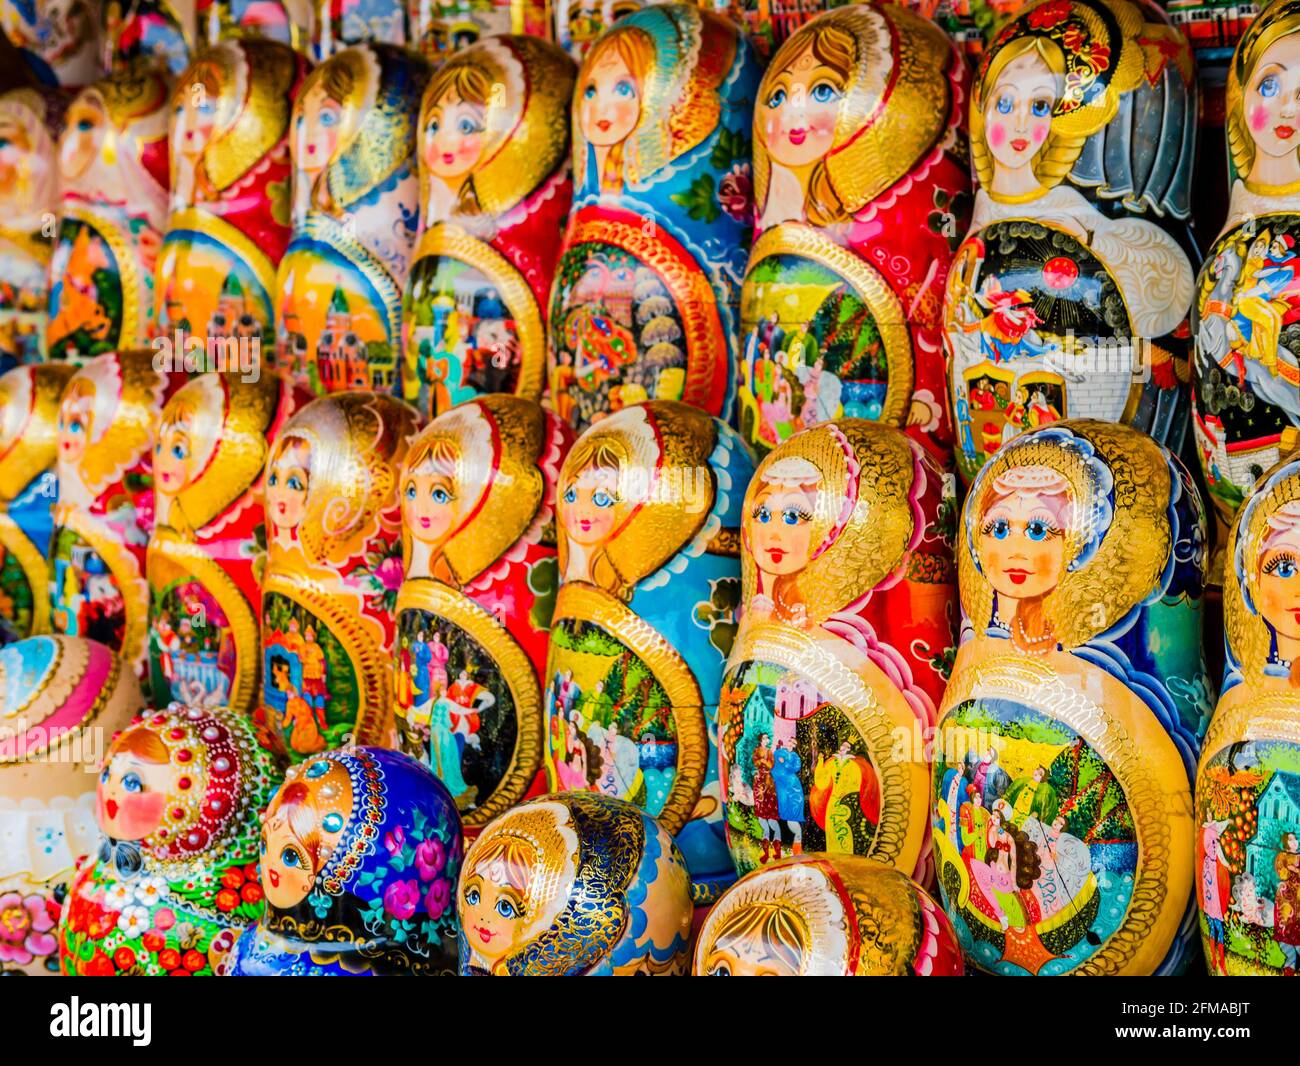 Colorful display of traditional matryoshka dolls, typical souvenir from Moscow, Russia Stock Photo